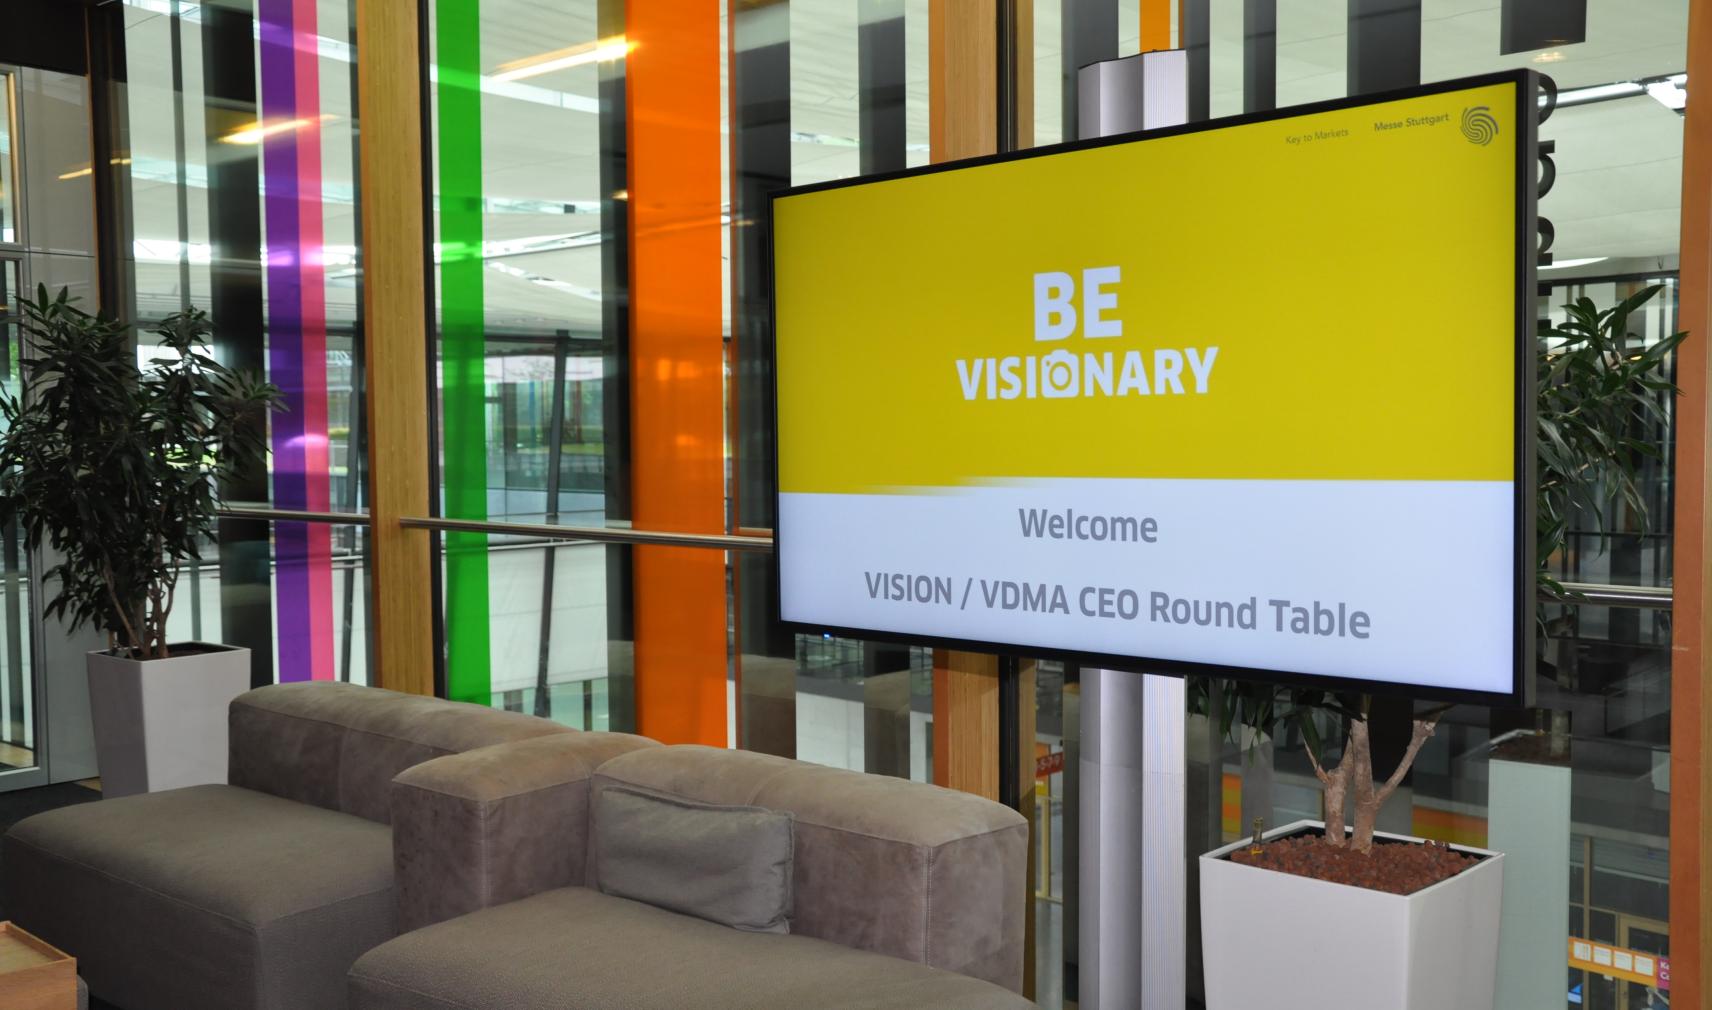 The Vision/VDMA round table event